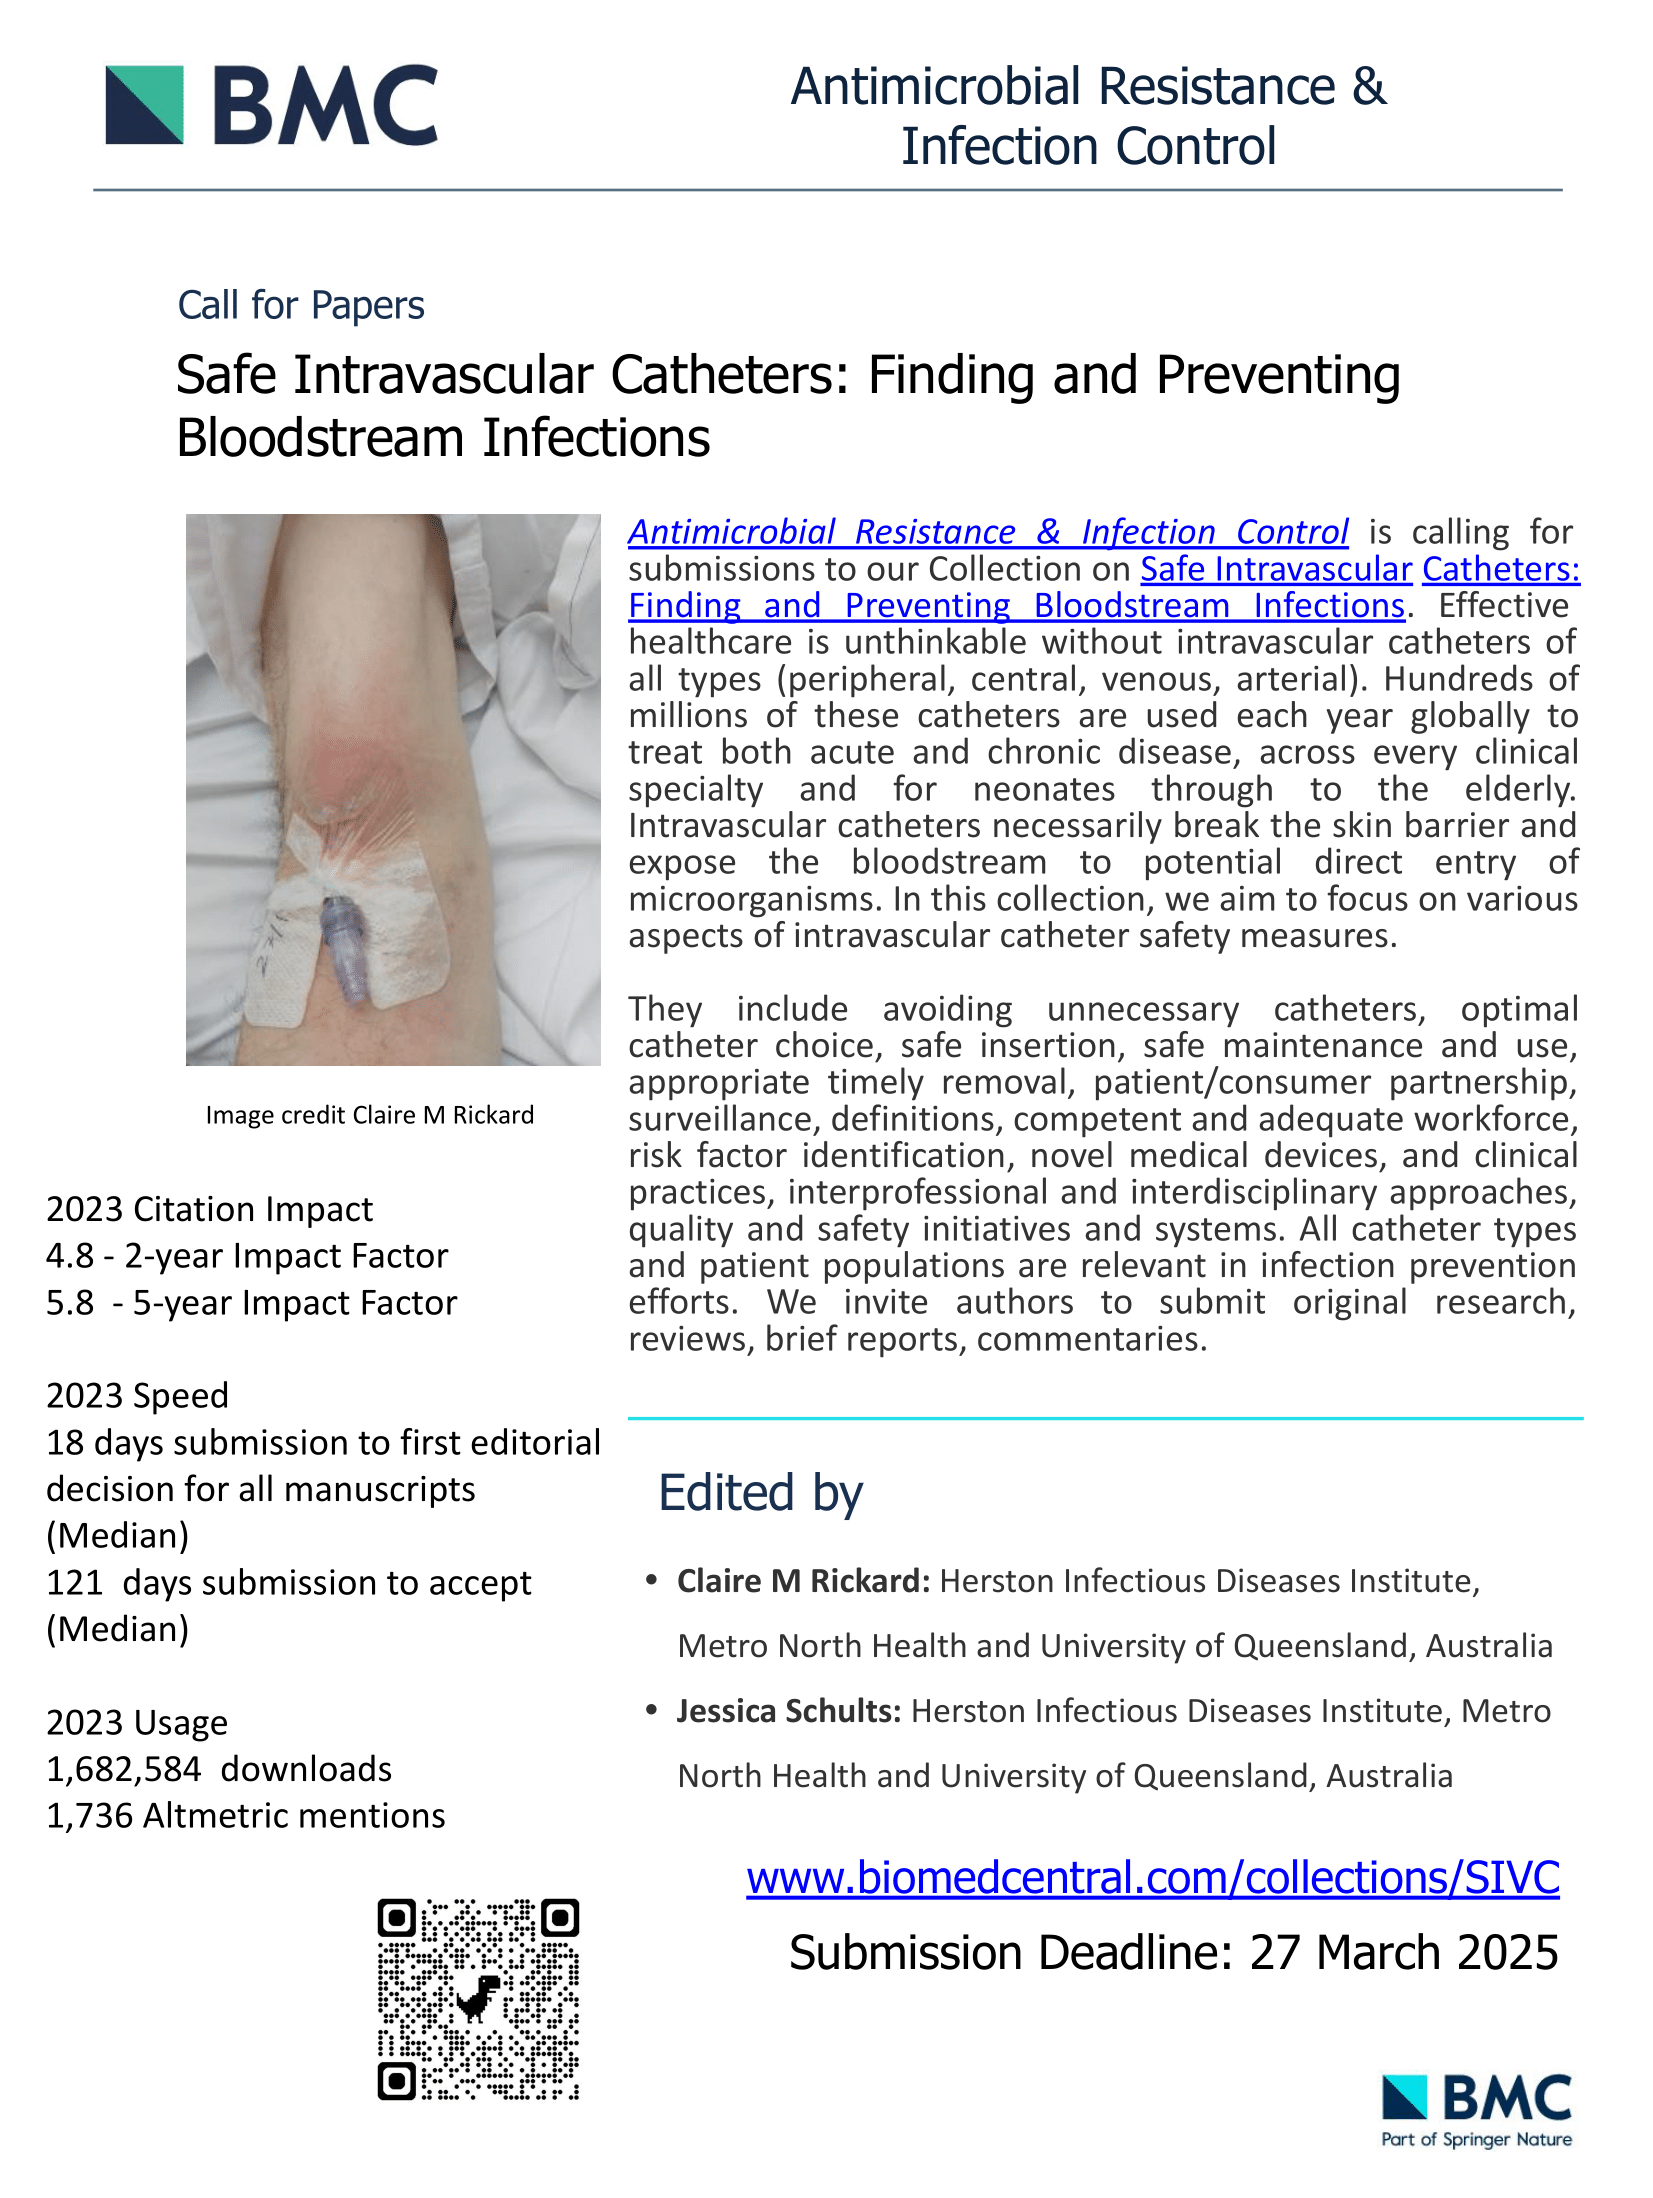 Call For Papers: Safe Intravascular Catheters: Finding and Preventing Bloodstream Infections